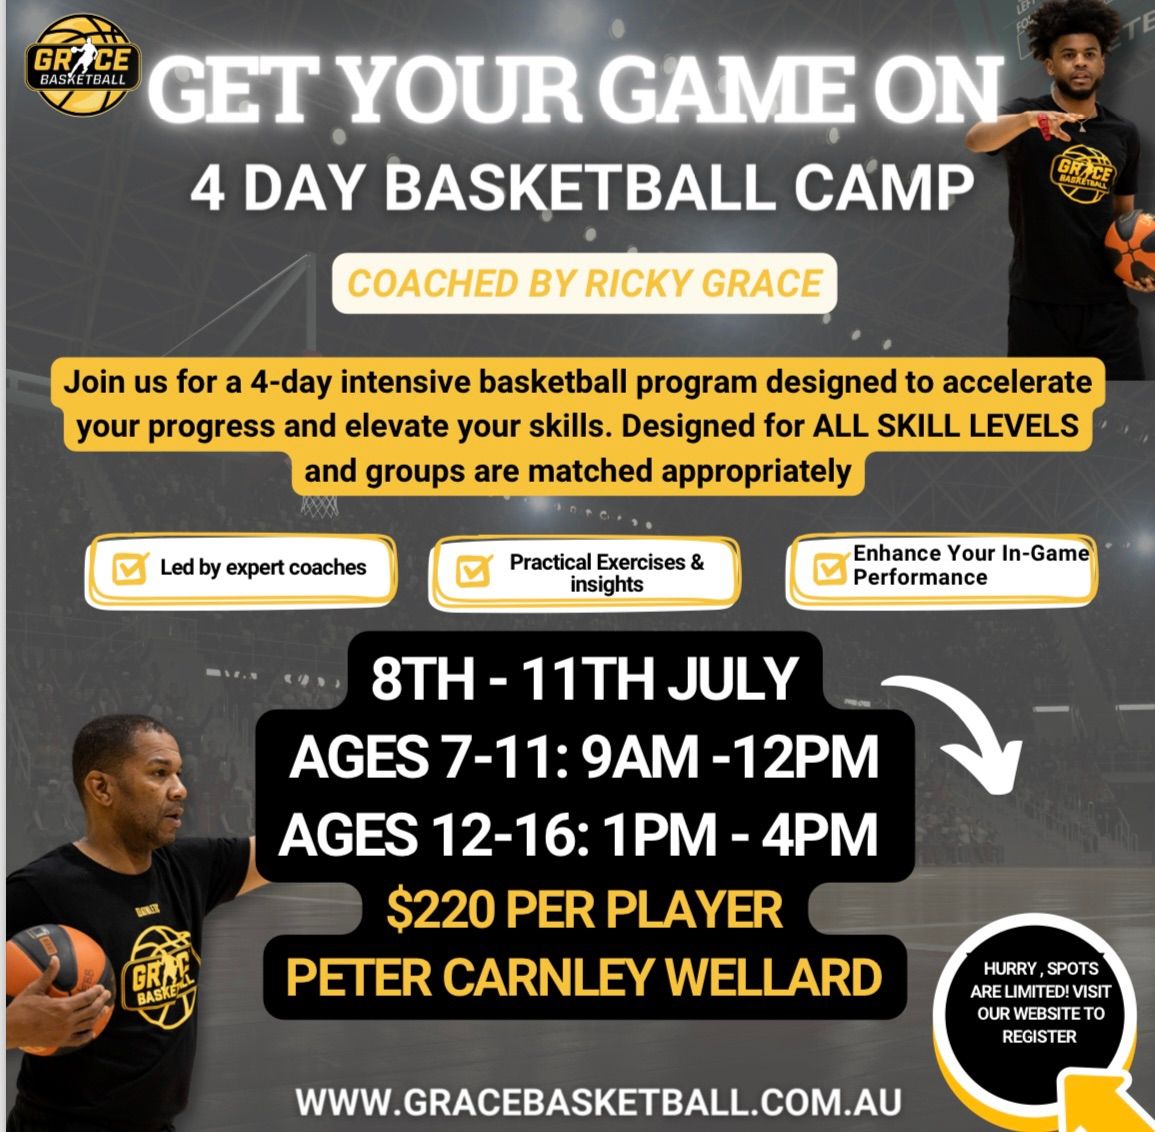 GET YOUR GAME ON 4 DAY CAMP 